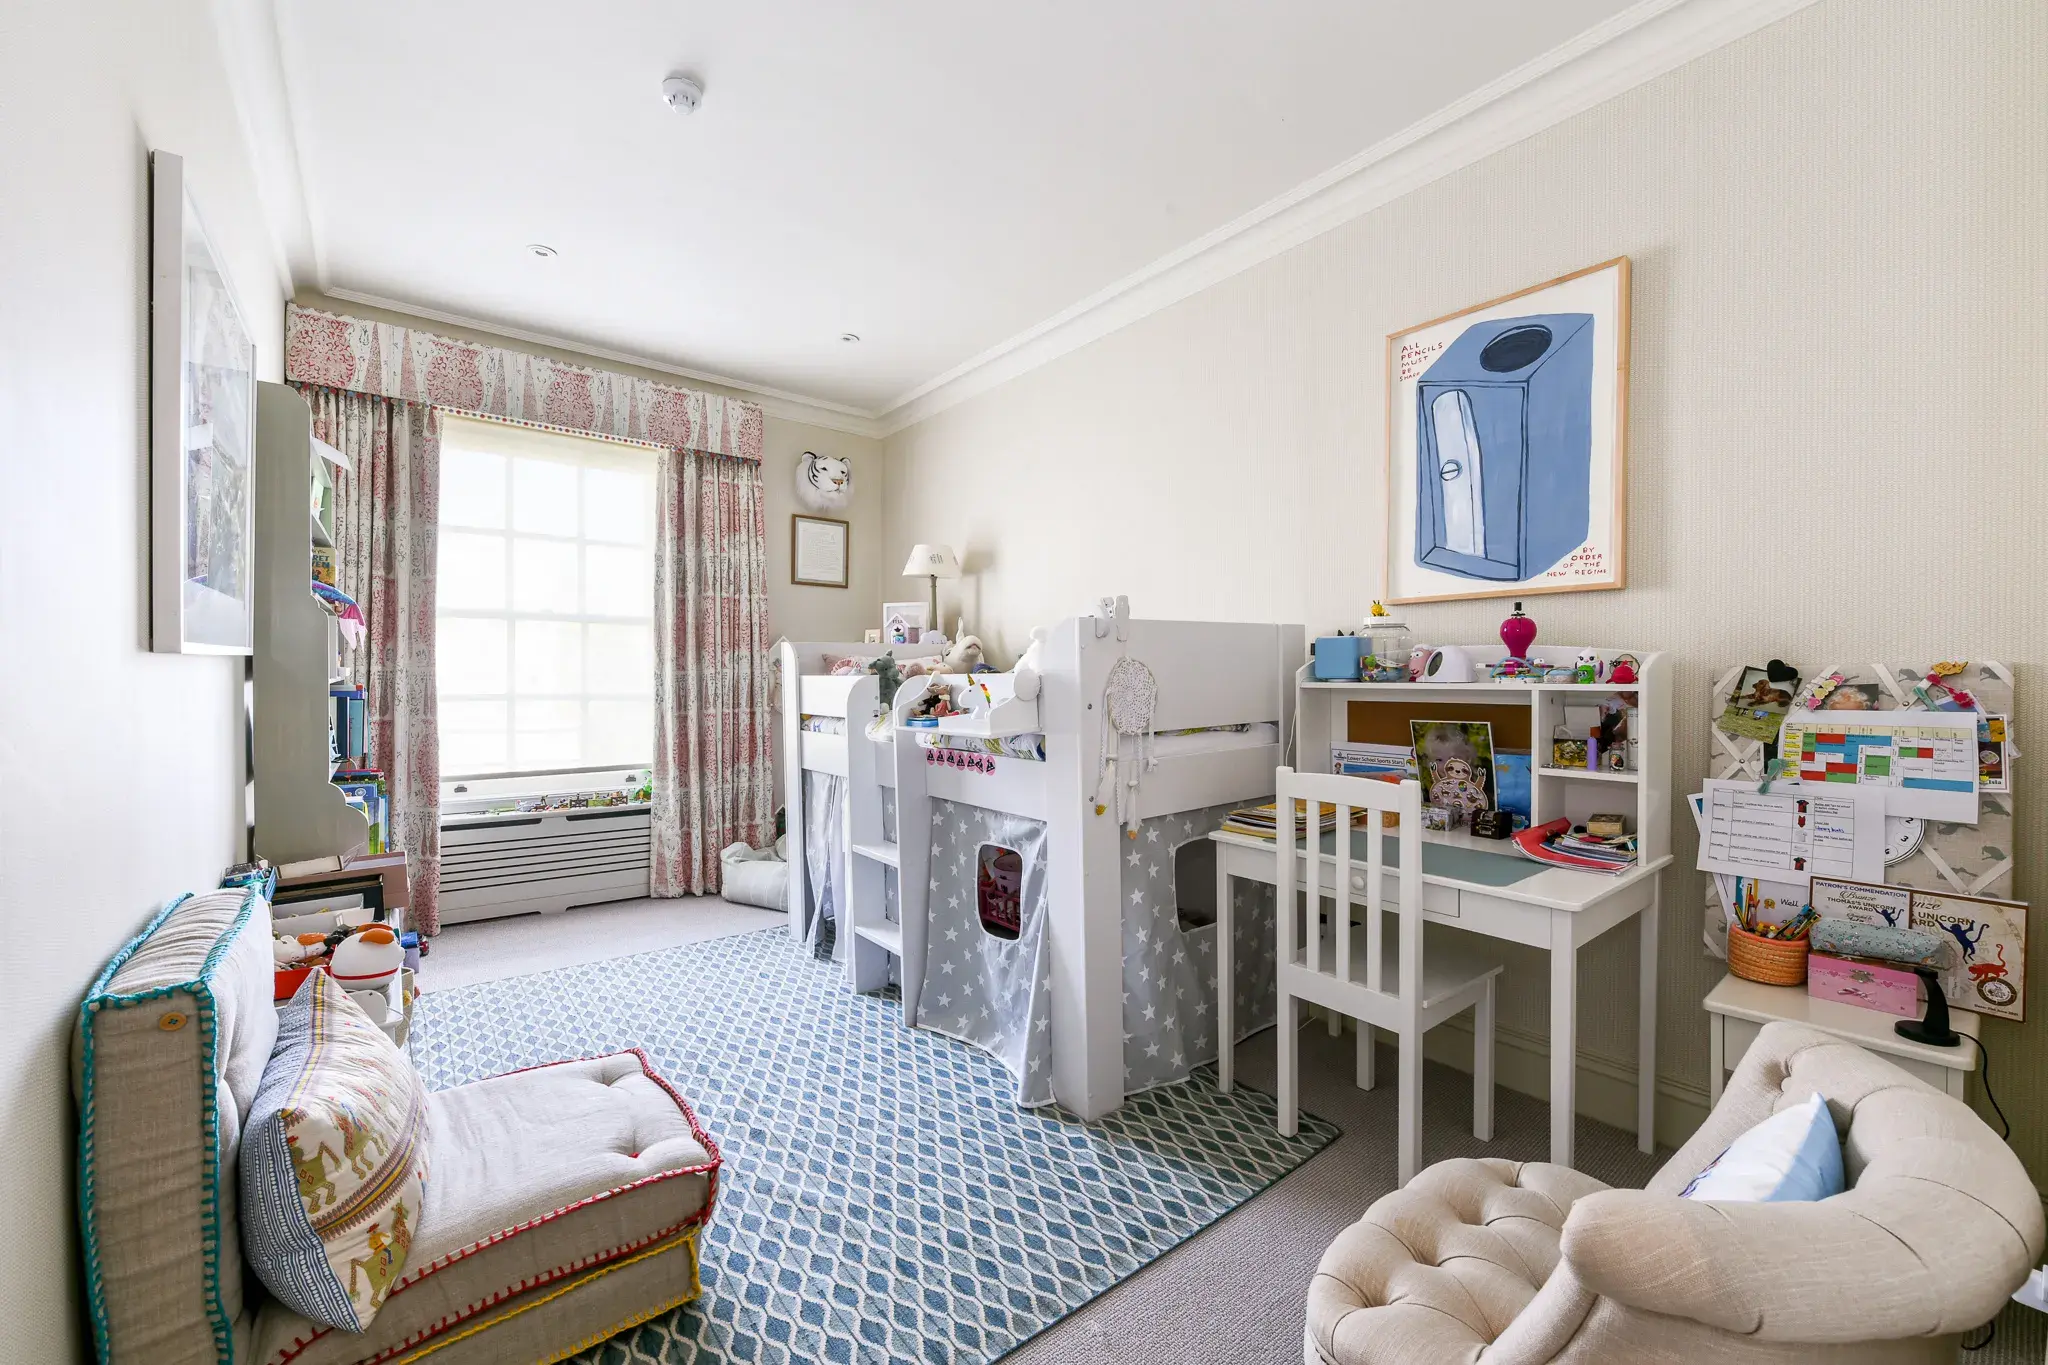 Argyll Road, holiday home in Kensington, London